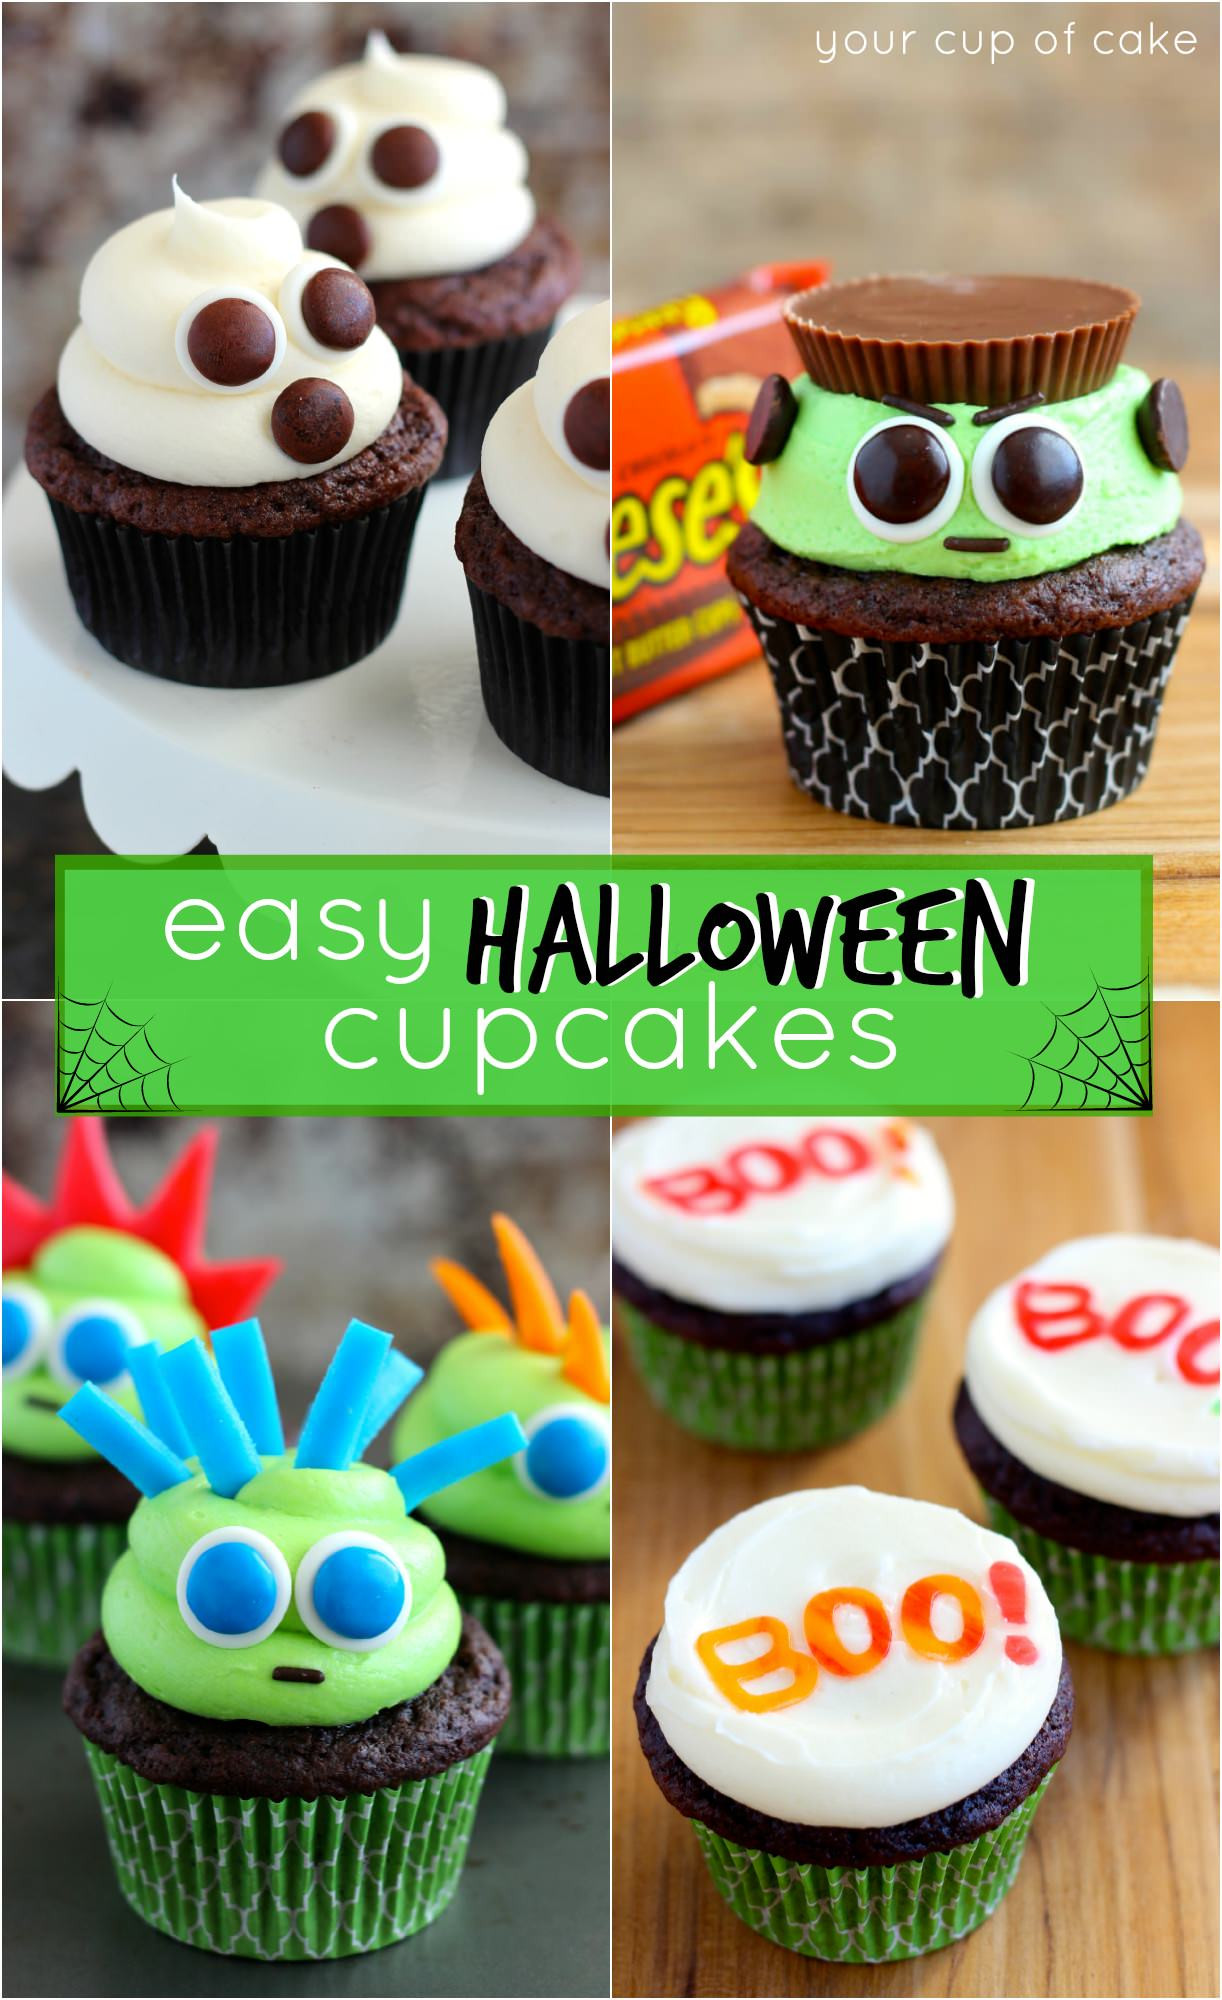 Halloween Cupcakes Designs
 Easy Halloween Cupcake Ideas Your Cup of Cake